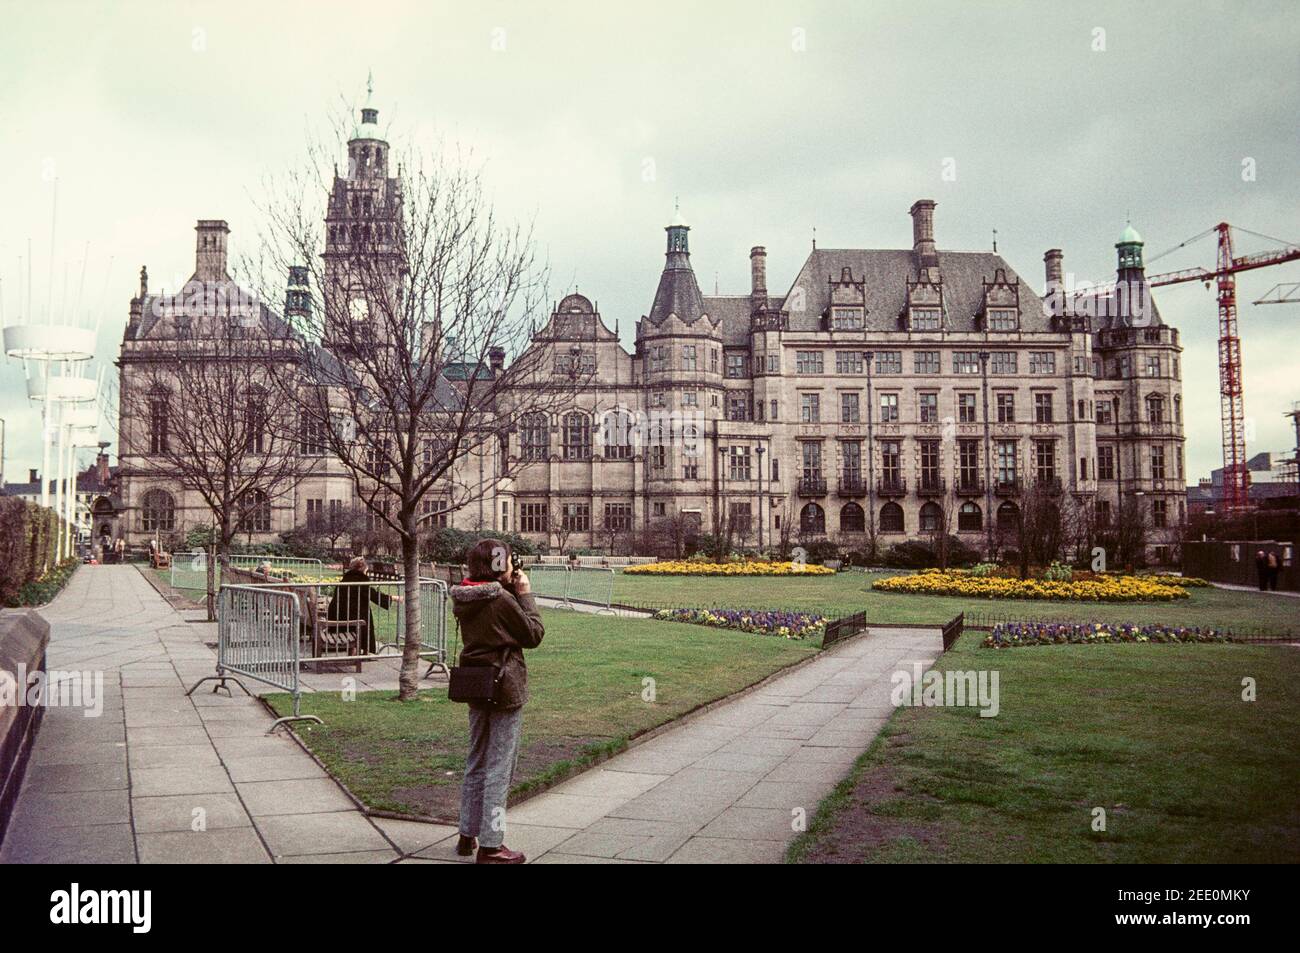 1975 Shefffield Young man taking photograph of The Egg Box construction  from The Peace Gardens in Sheffield, England. The Gardens front onto  Sheffield's gothic town hall. The Gardens were laid out in